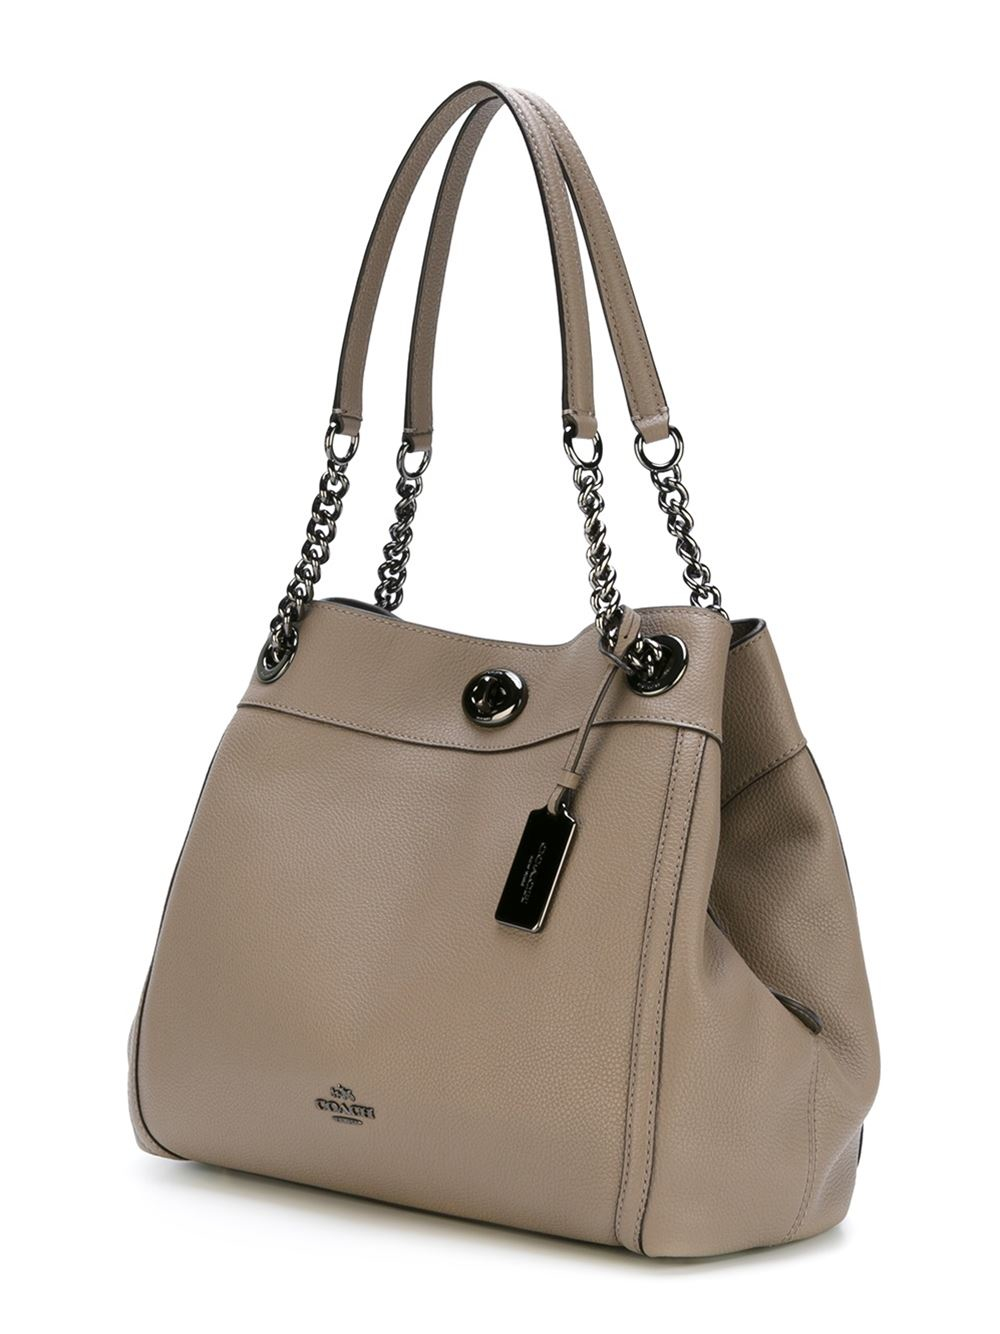 COACH Chain Shoulder Bag in Gray - Lyst